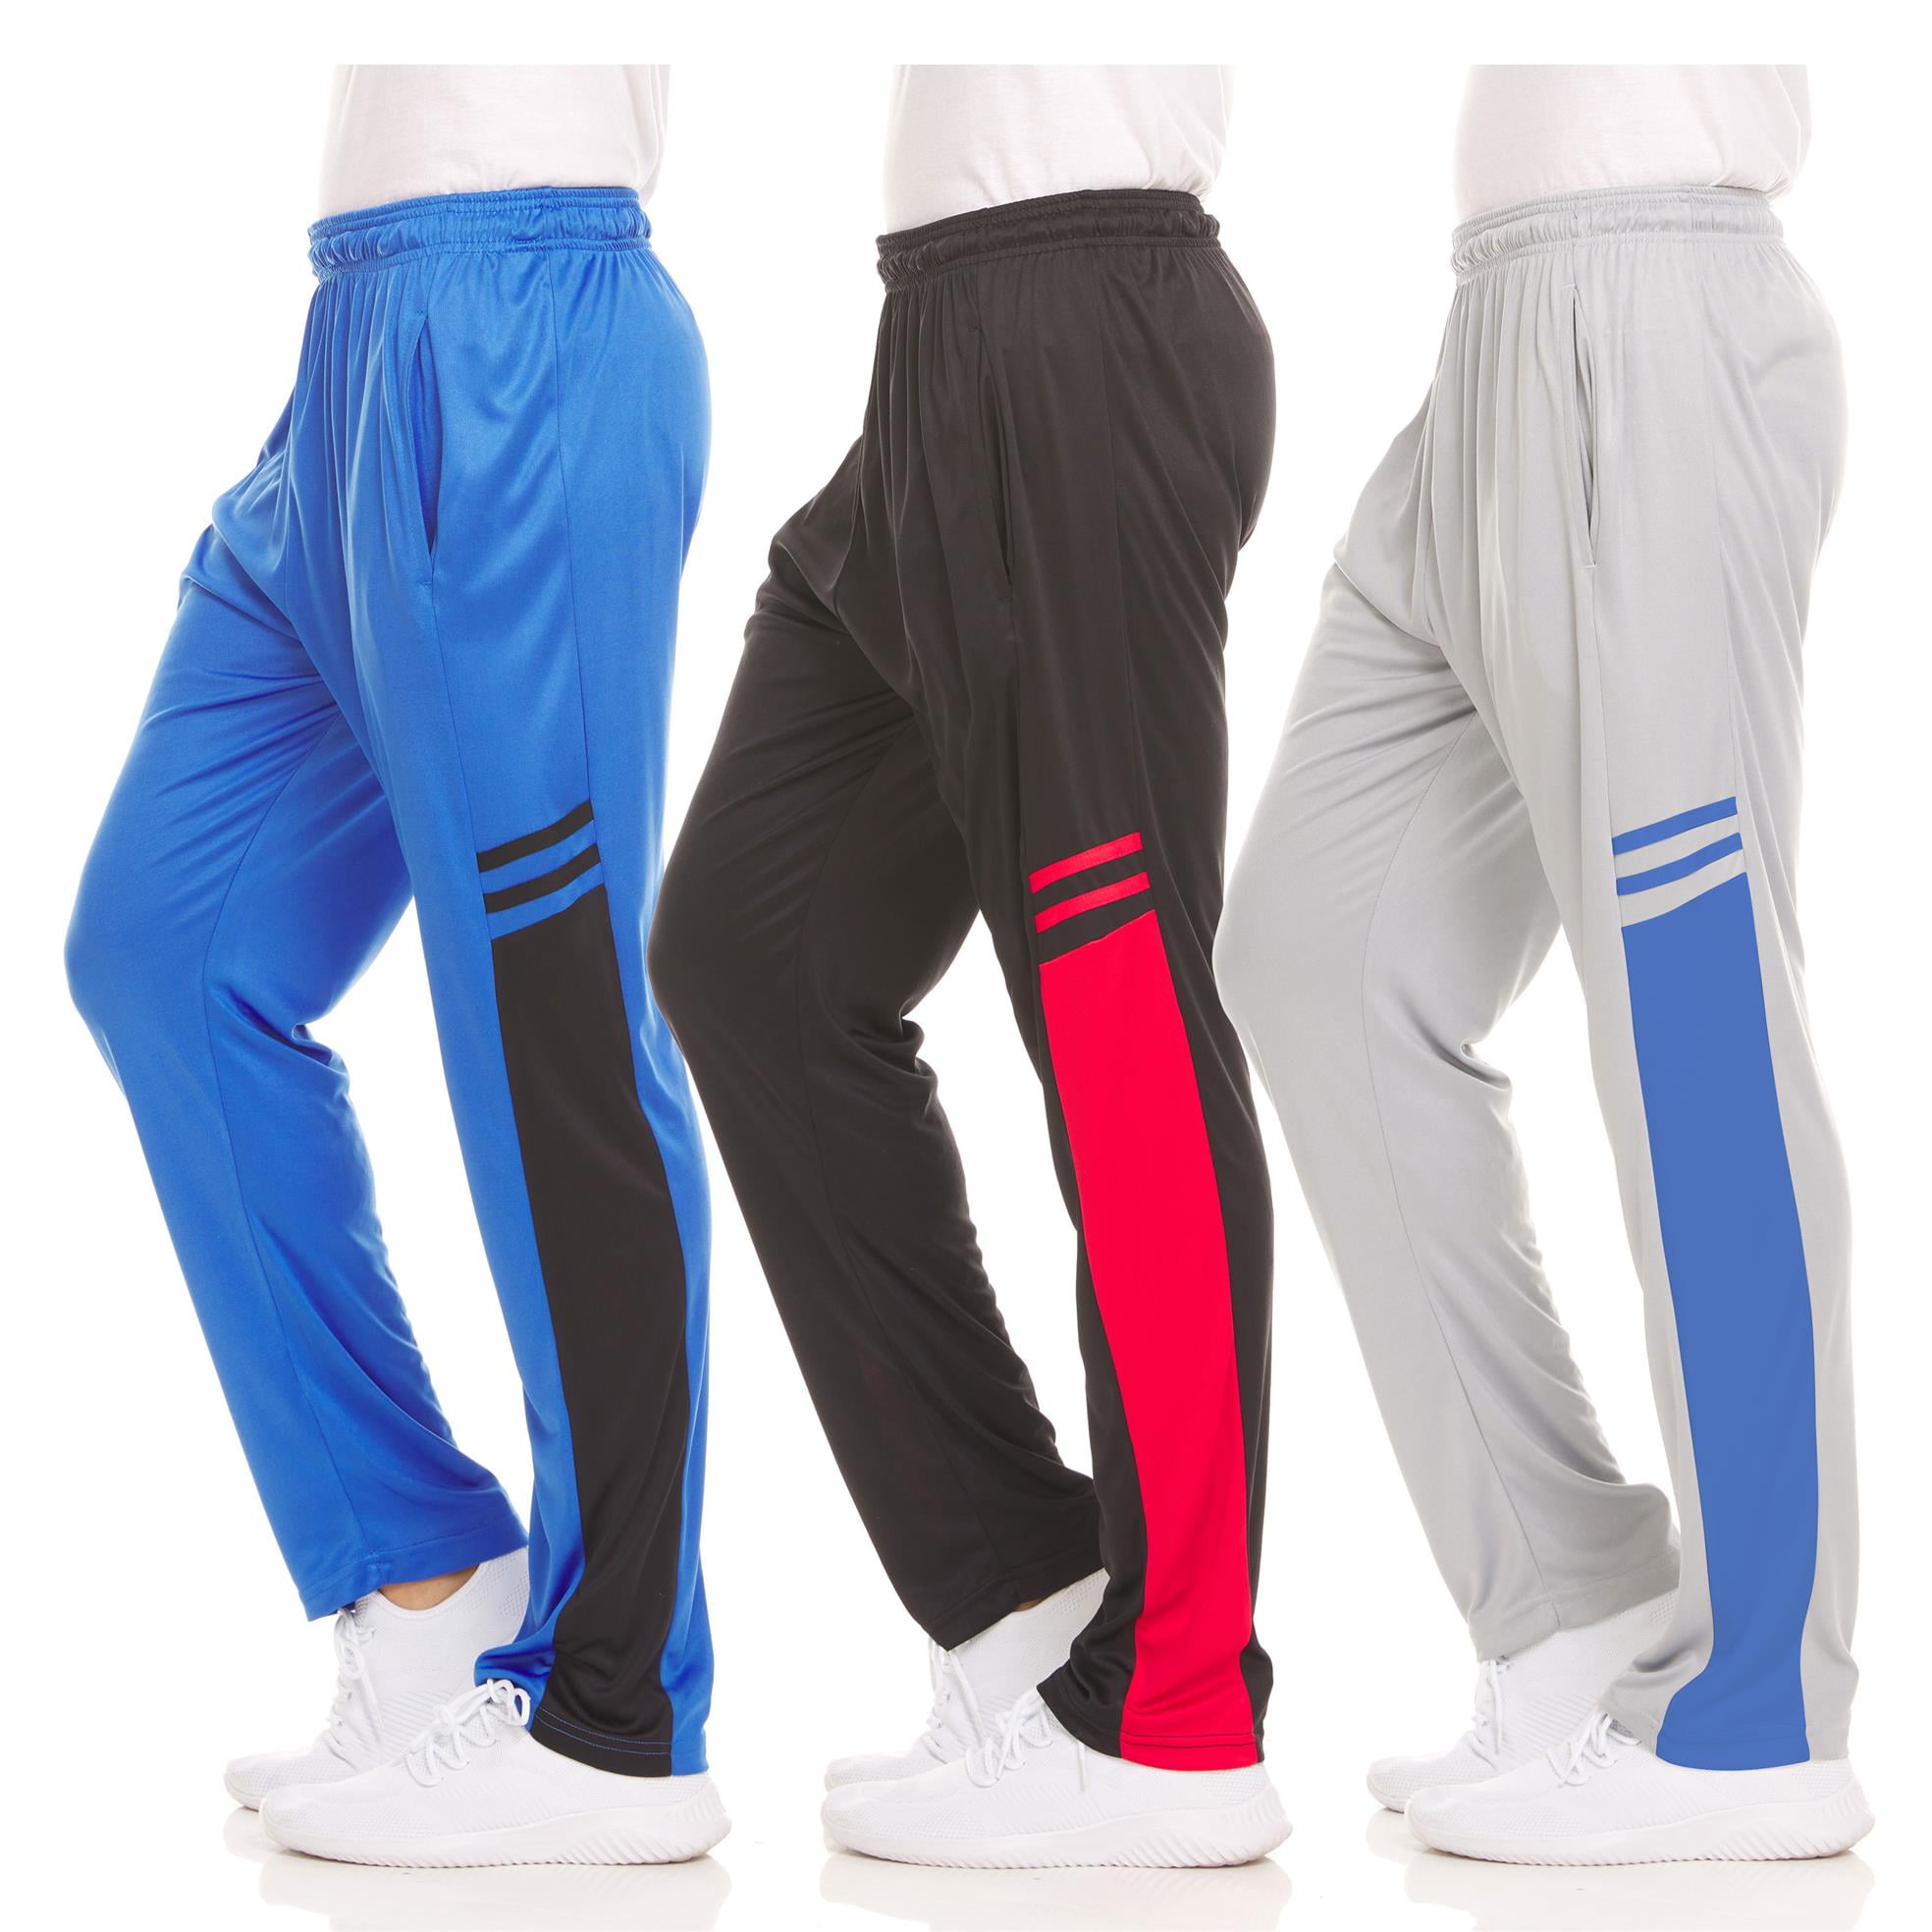 Dri-Fit Pant 3 Pack-Moisture Wicking, High Performance, Comfy Spandex ...